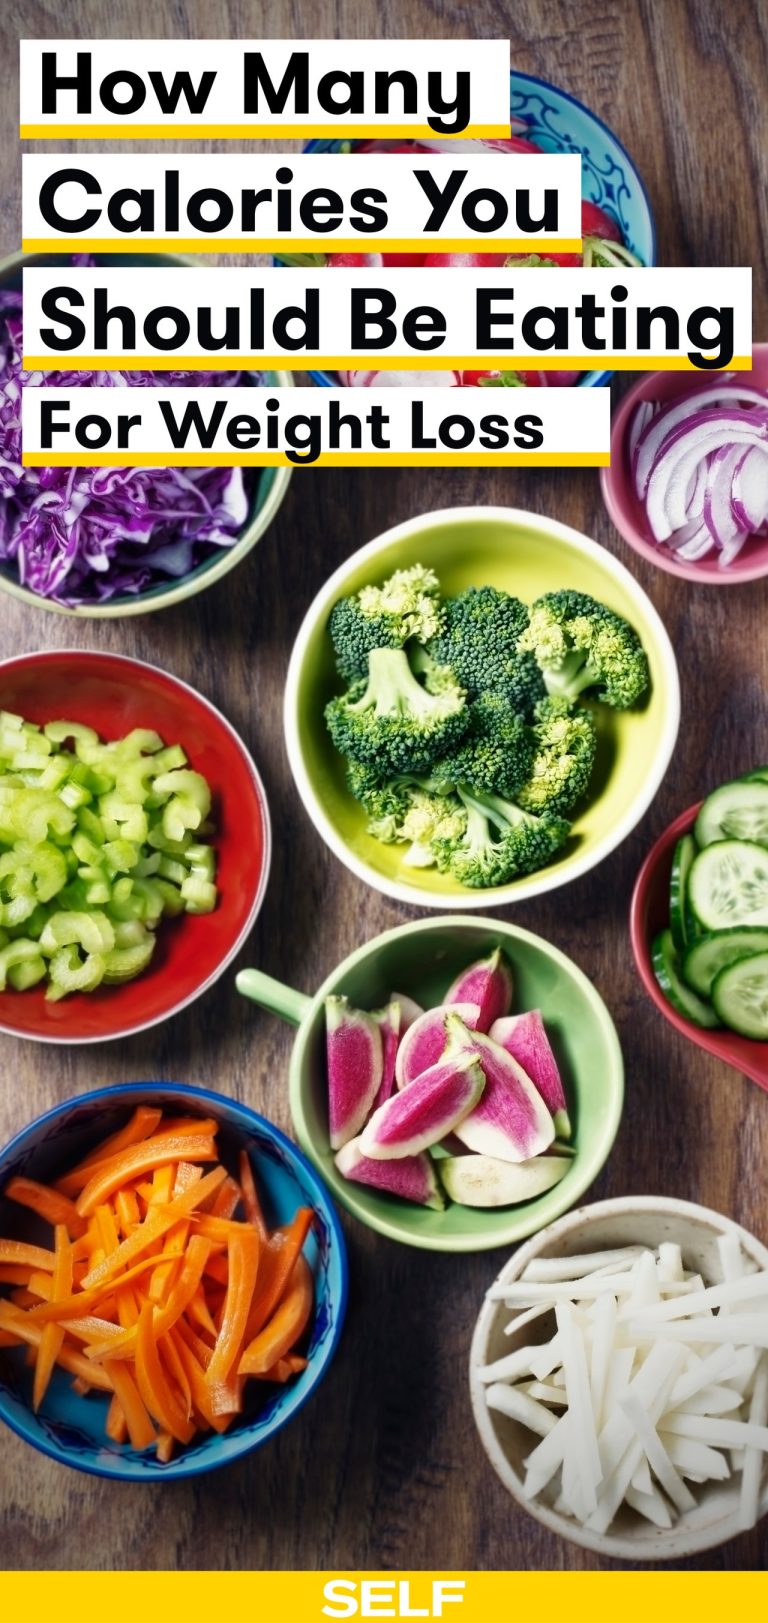 How Many Calories Should You Eat To Lose Weight